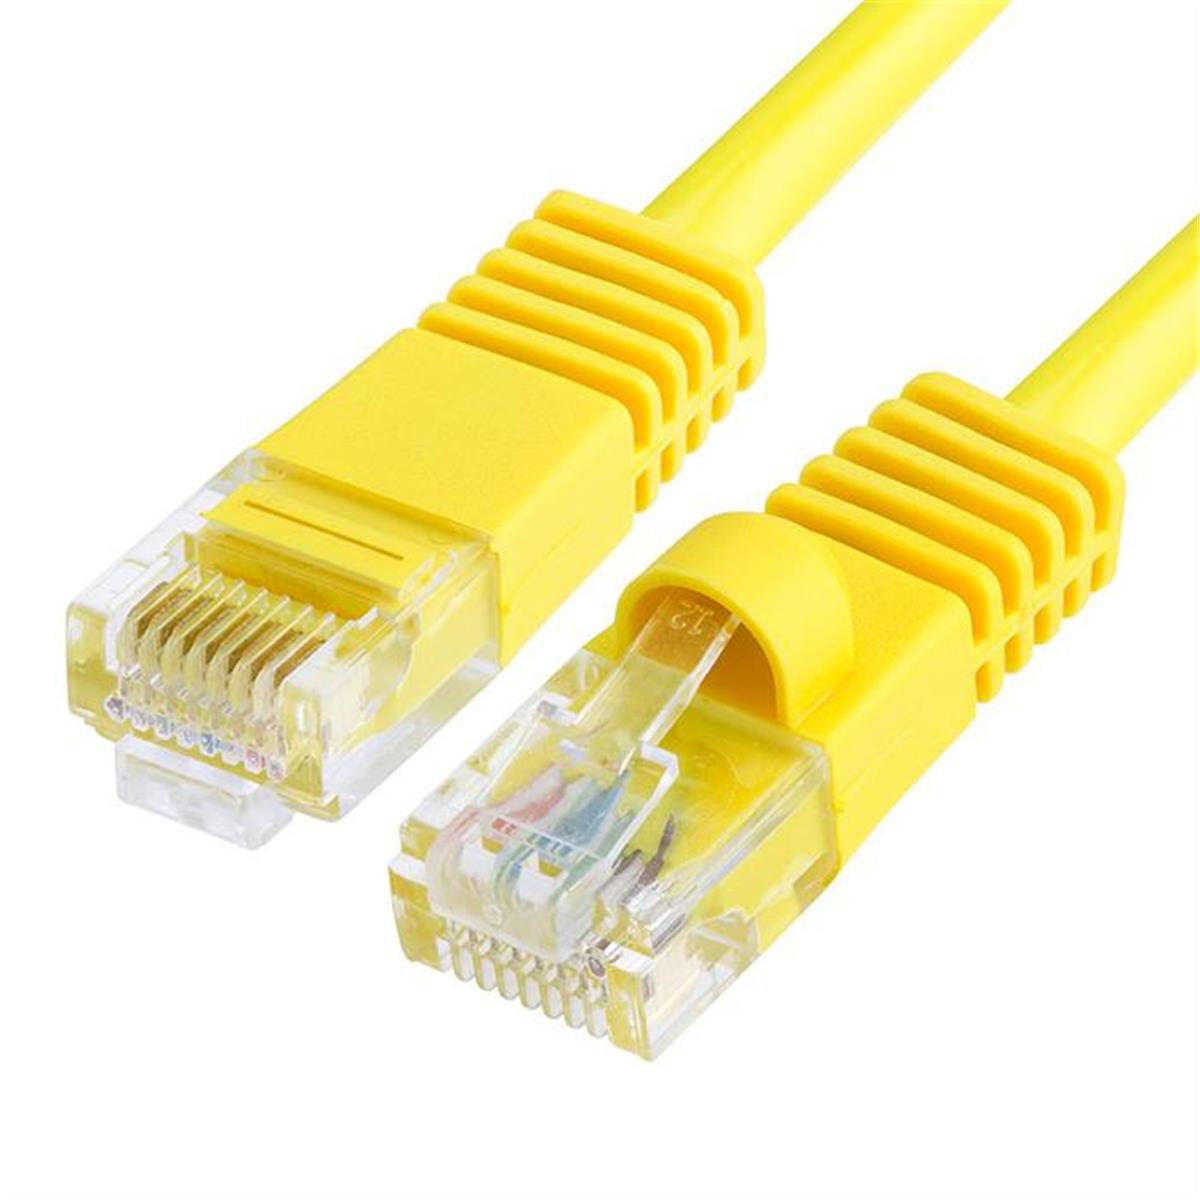 Picture of CMPLE 873-N 350 MHz RJ45 Cat5e Ethernet Network Patch Cable - 7 ft. - Yellow